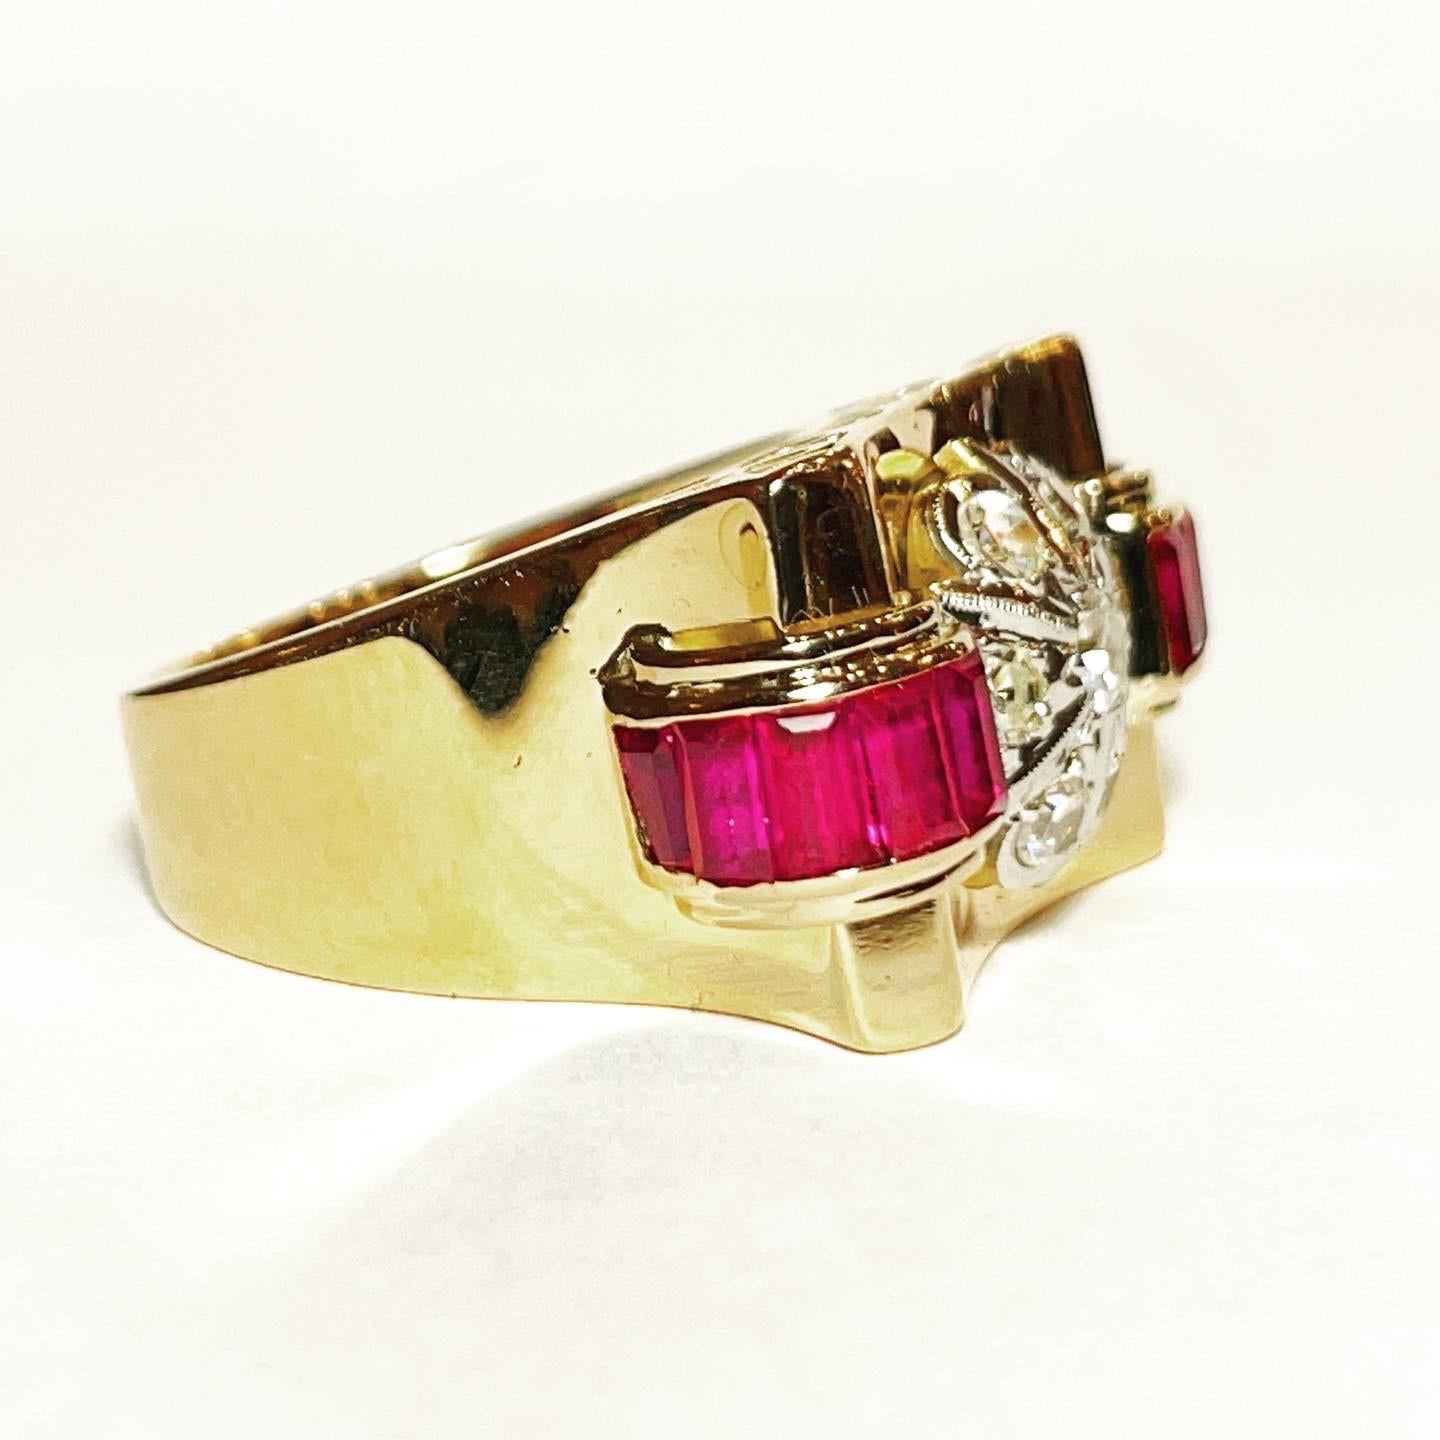 Superb tank ring, linear and geometrical design typical for this period.
Ring in 18 karat yellow  gold, diamonds and rubies.
Circa 1935-1940
Brilliant diamond cut and calibrated cut rubys.
Total approximate weight of the diamonds:  0,45 carat.
Total